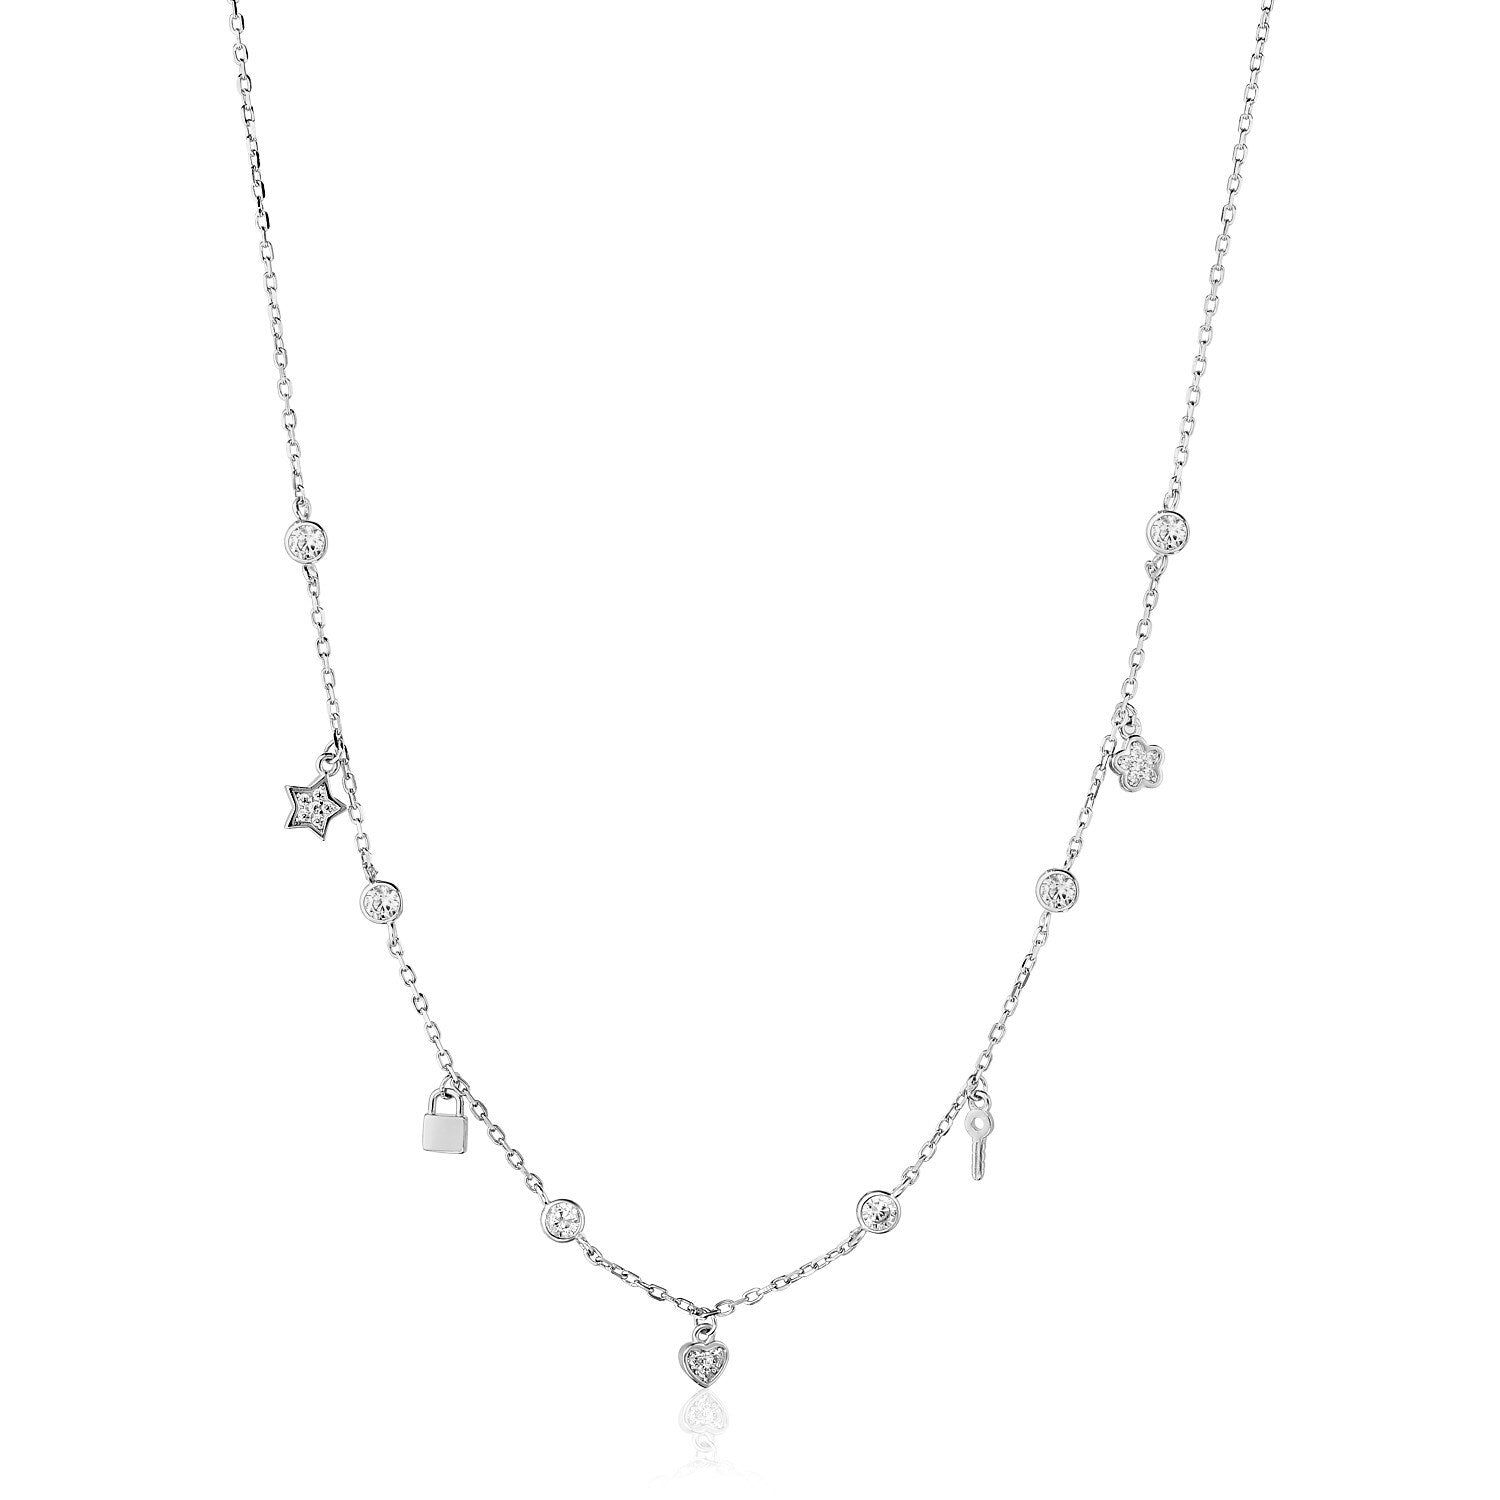 Sterling Silver 18 inch Necklace with Novelty Dangles and Cubic Zicronias, size 18''